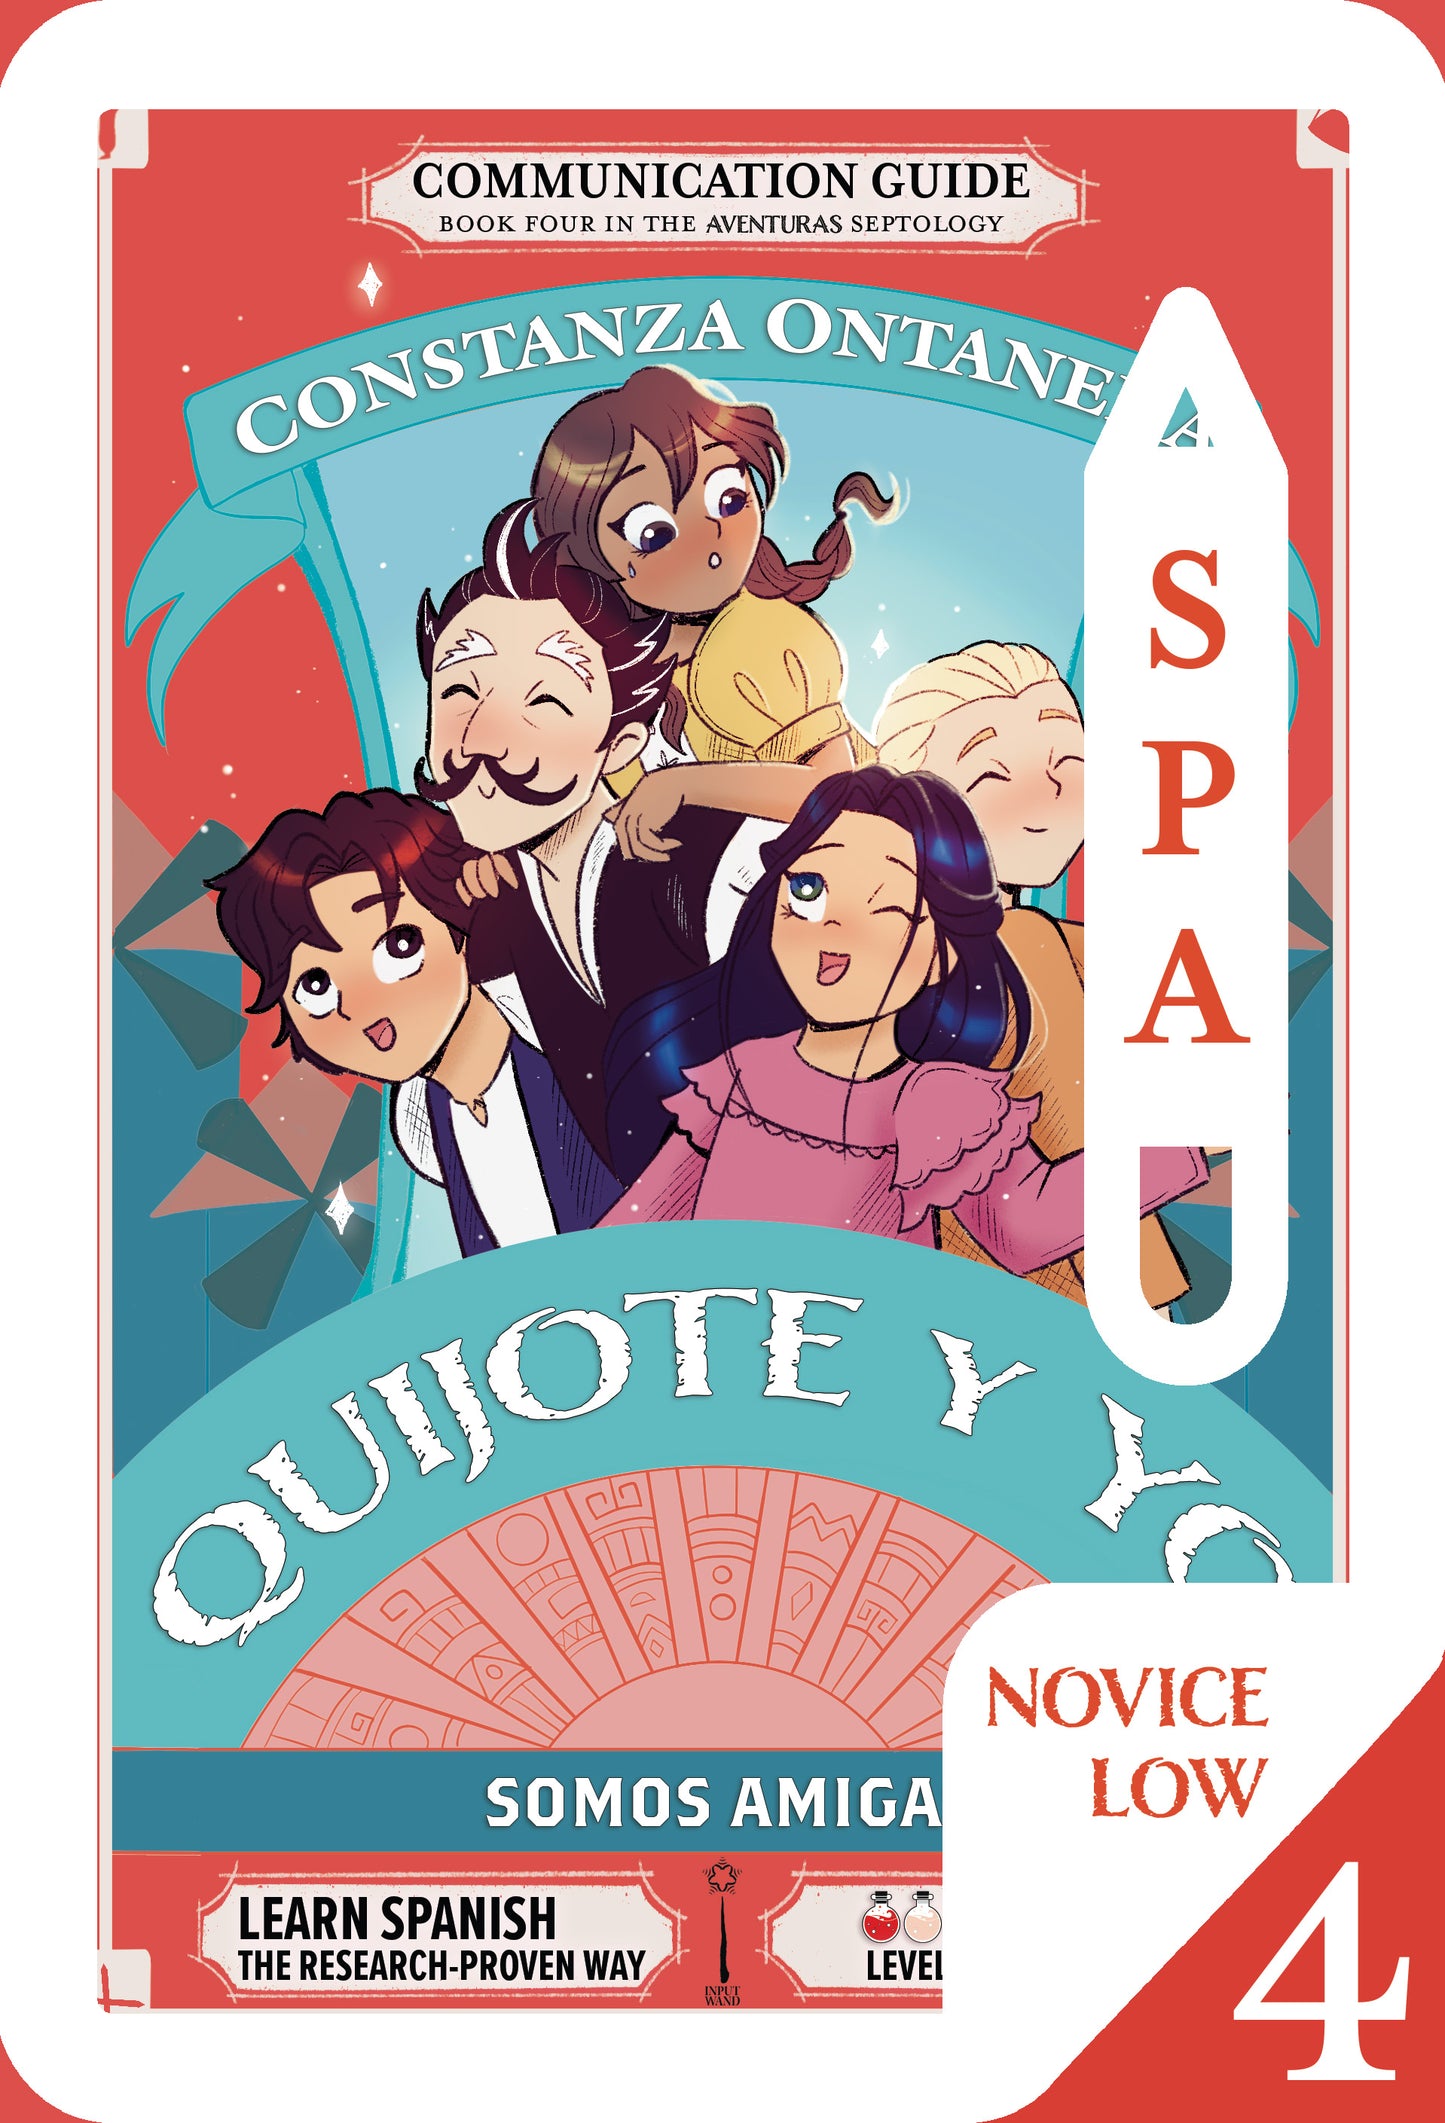 Communication Guide: Quijote y Yo: Somos Amigas, Book Four in the Novice Low "Aventuras" Septology